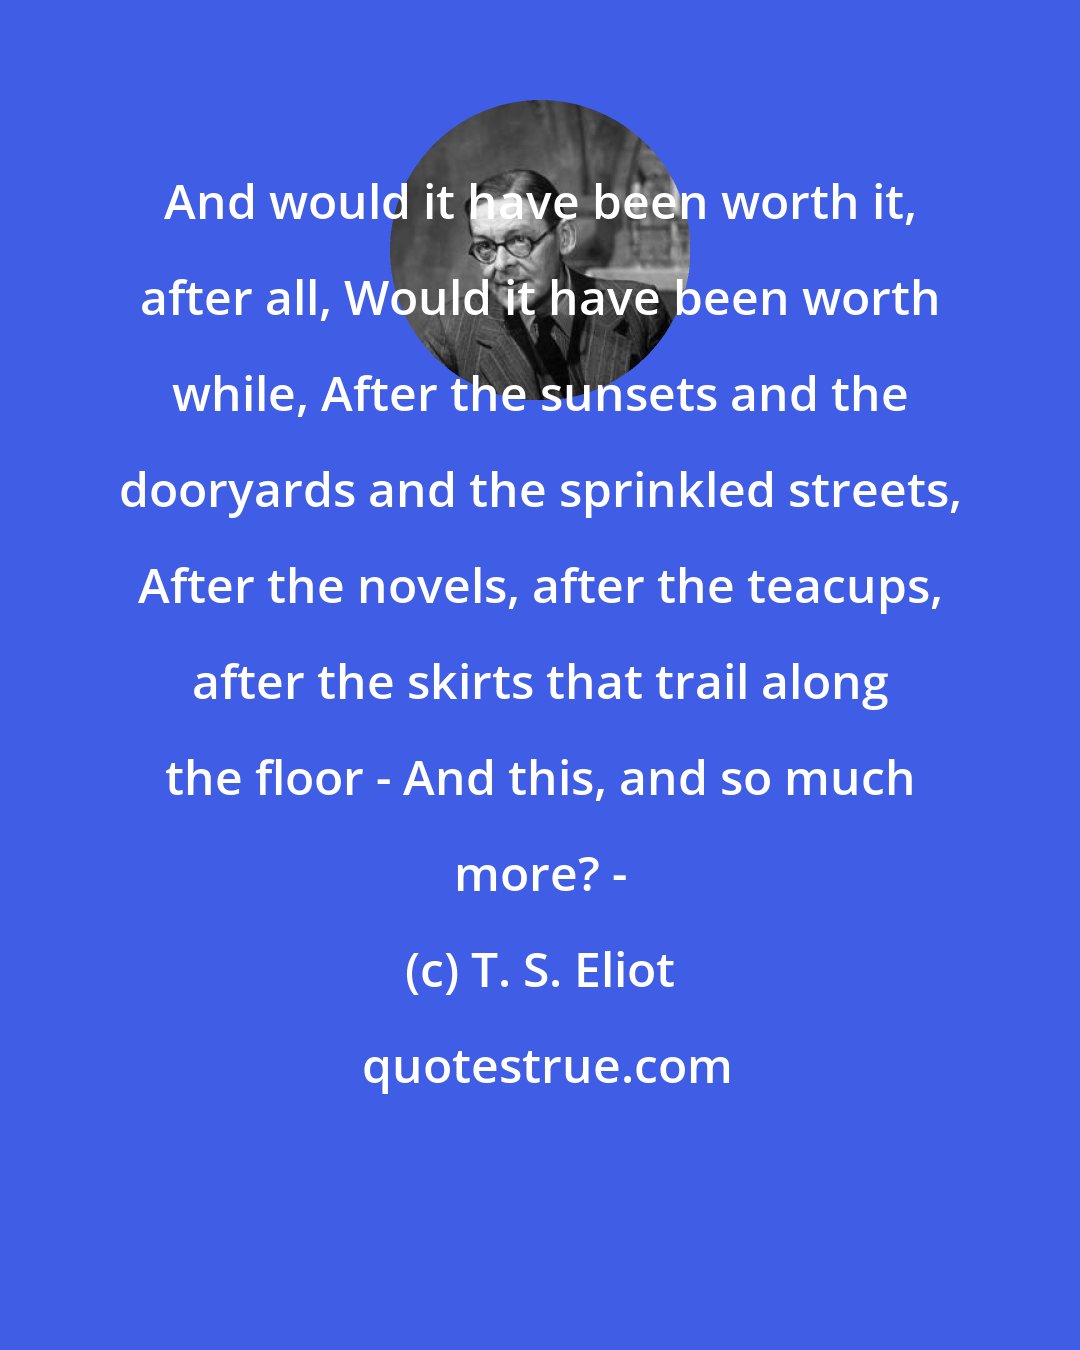 T. S. Eliot: And would it have been worth it, after all, Would it have been worth while, After the sunsets and the dooryards and the sprinkled streets, After the novels, after the teacups, after the skirts that trail along the floor - And this, and so much more? -